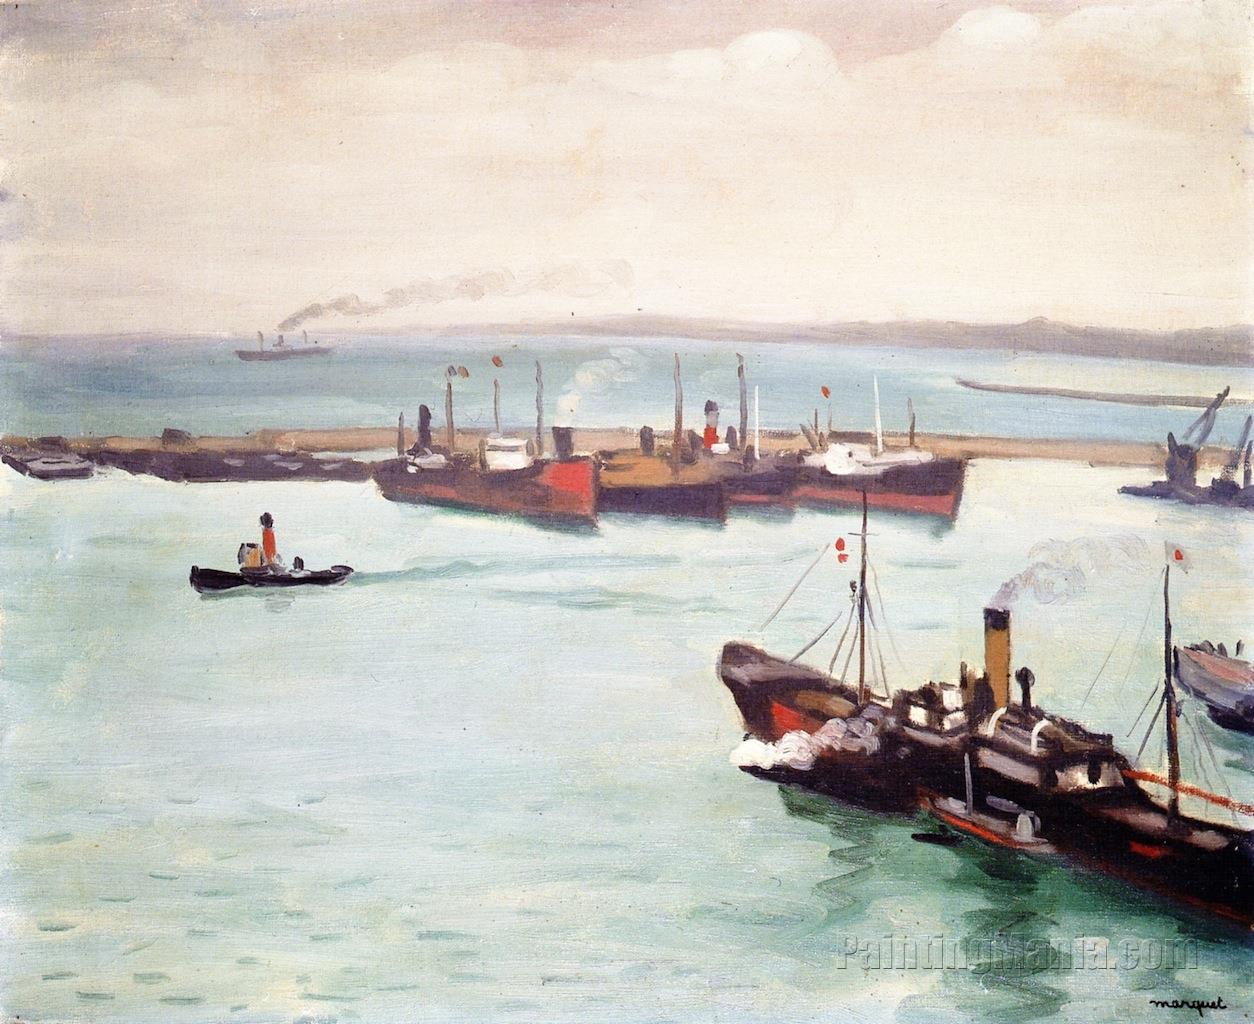 The Port of Algiers, Steamships in the Harbor